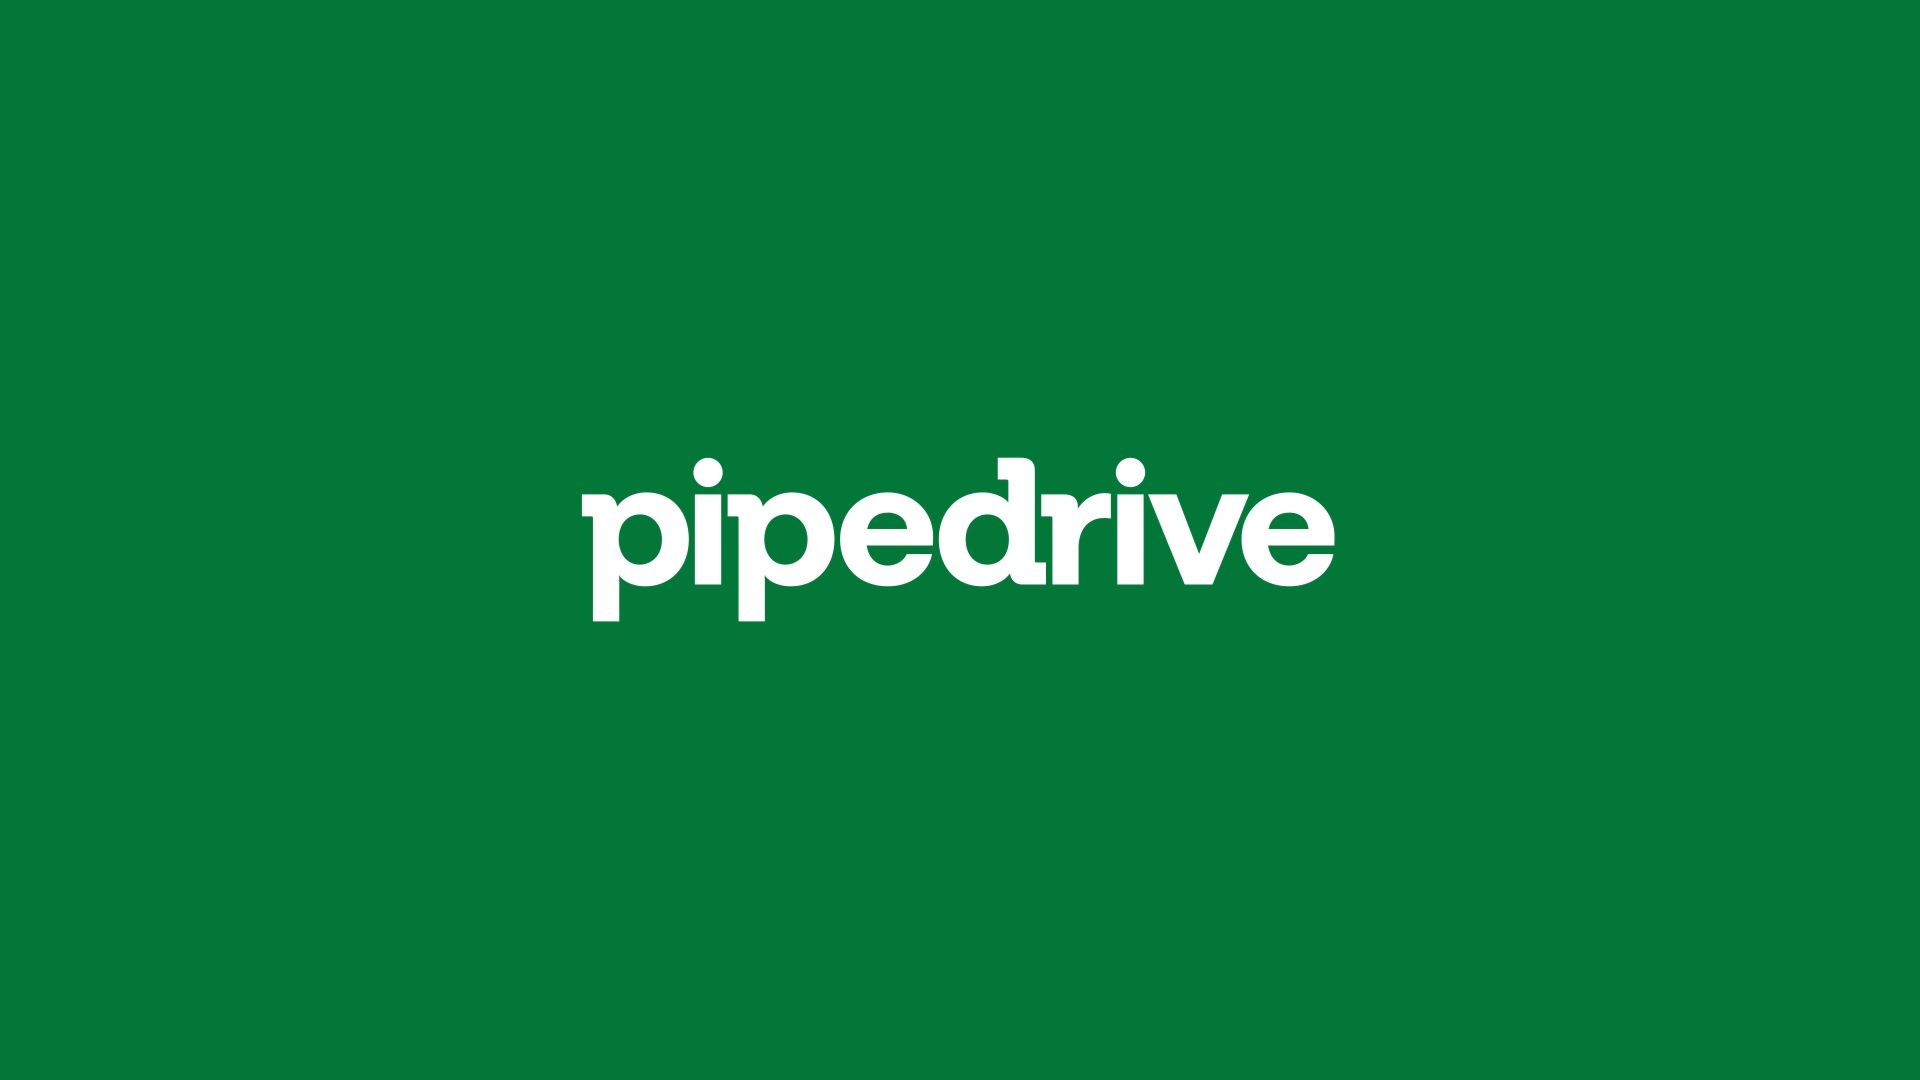 Pipedrive unveils AI-powered Sales Assistant to significantly boost sales performance Video: Pipedrive